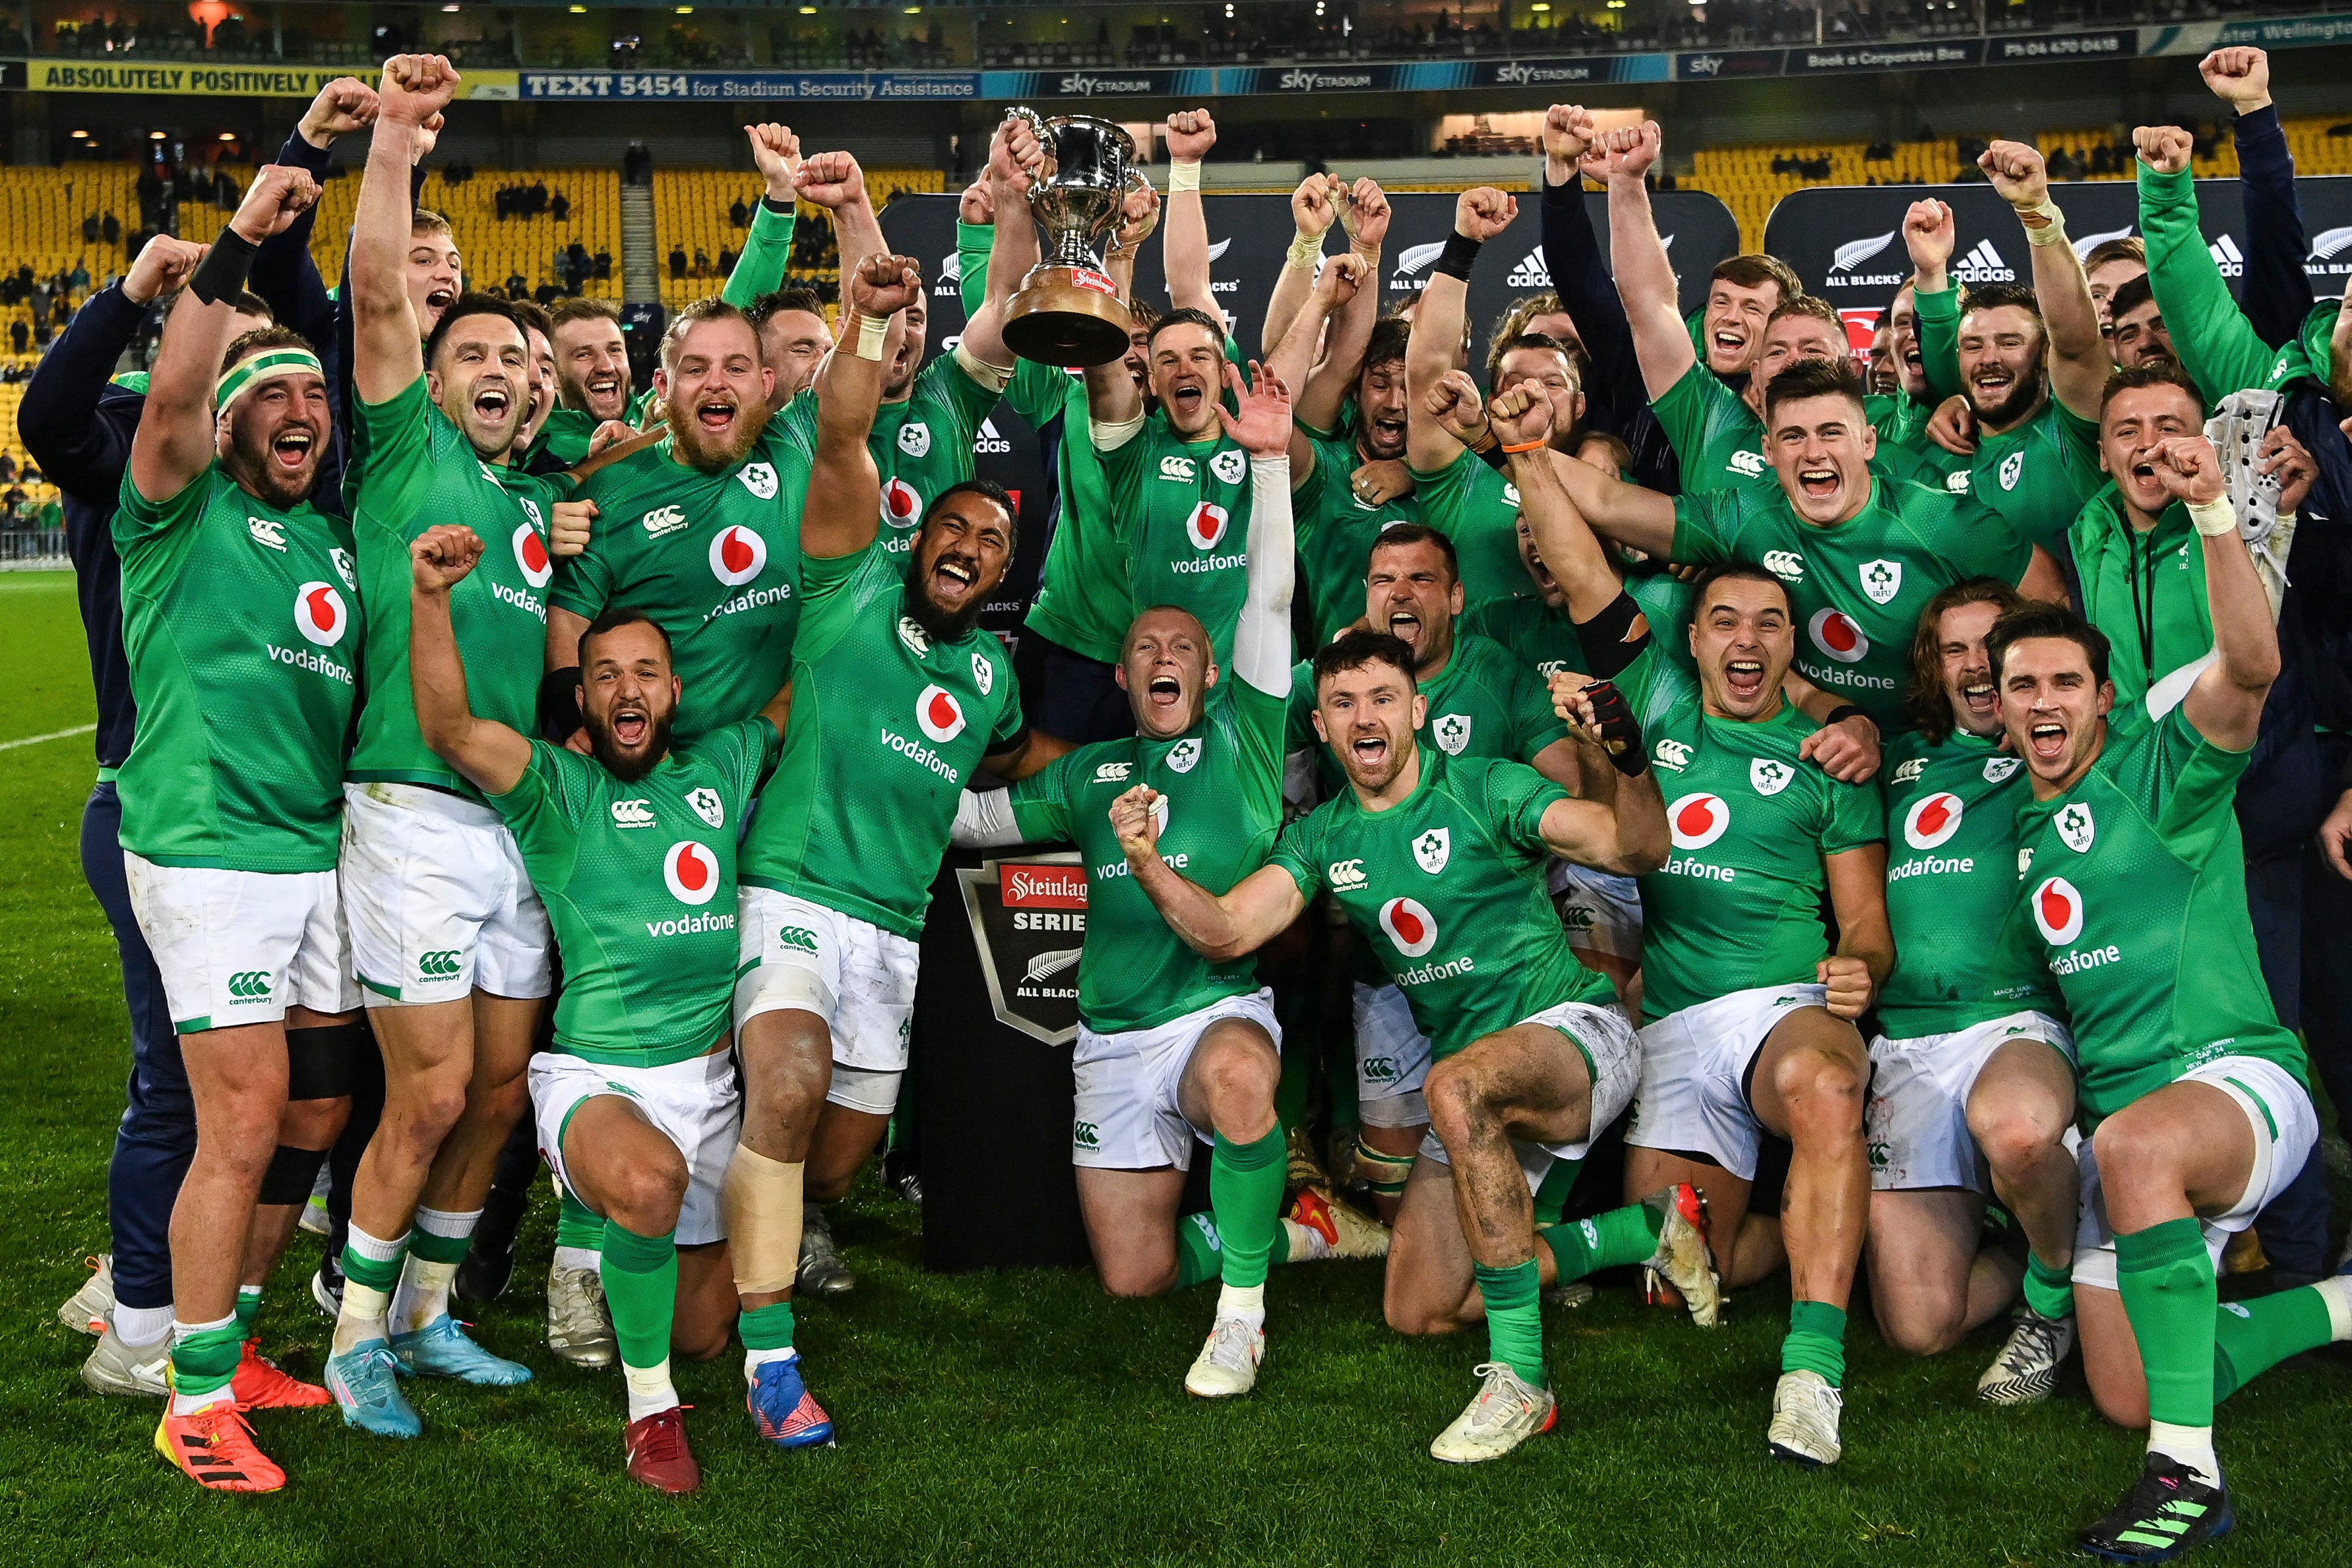 Ireland beat the All Blacks 32-22 on Saturday to win the series 2-1